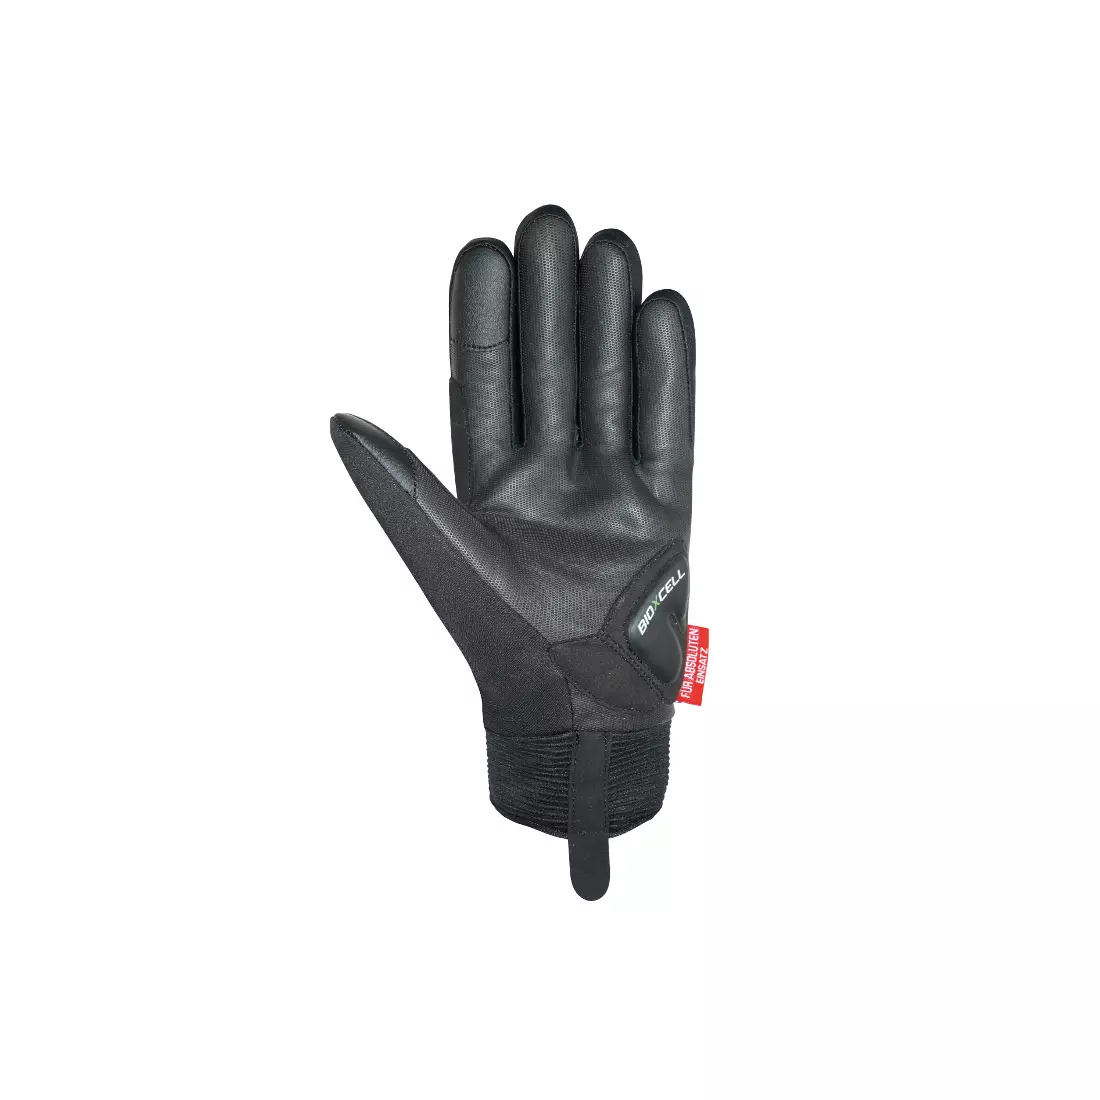 CHIBA BIOXCELL WINTER winter cycling gloves, black 31138